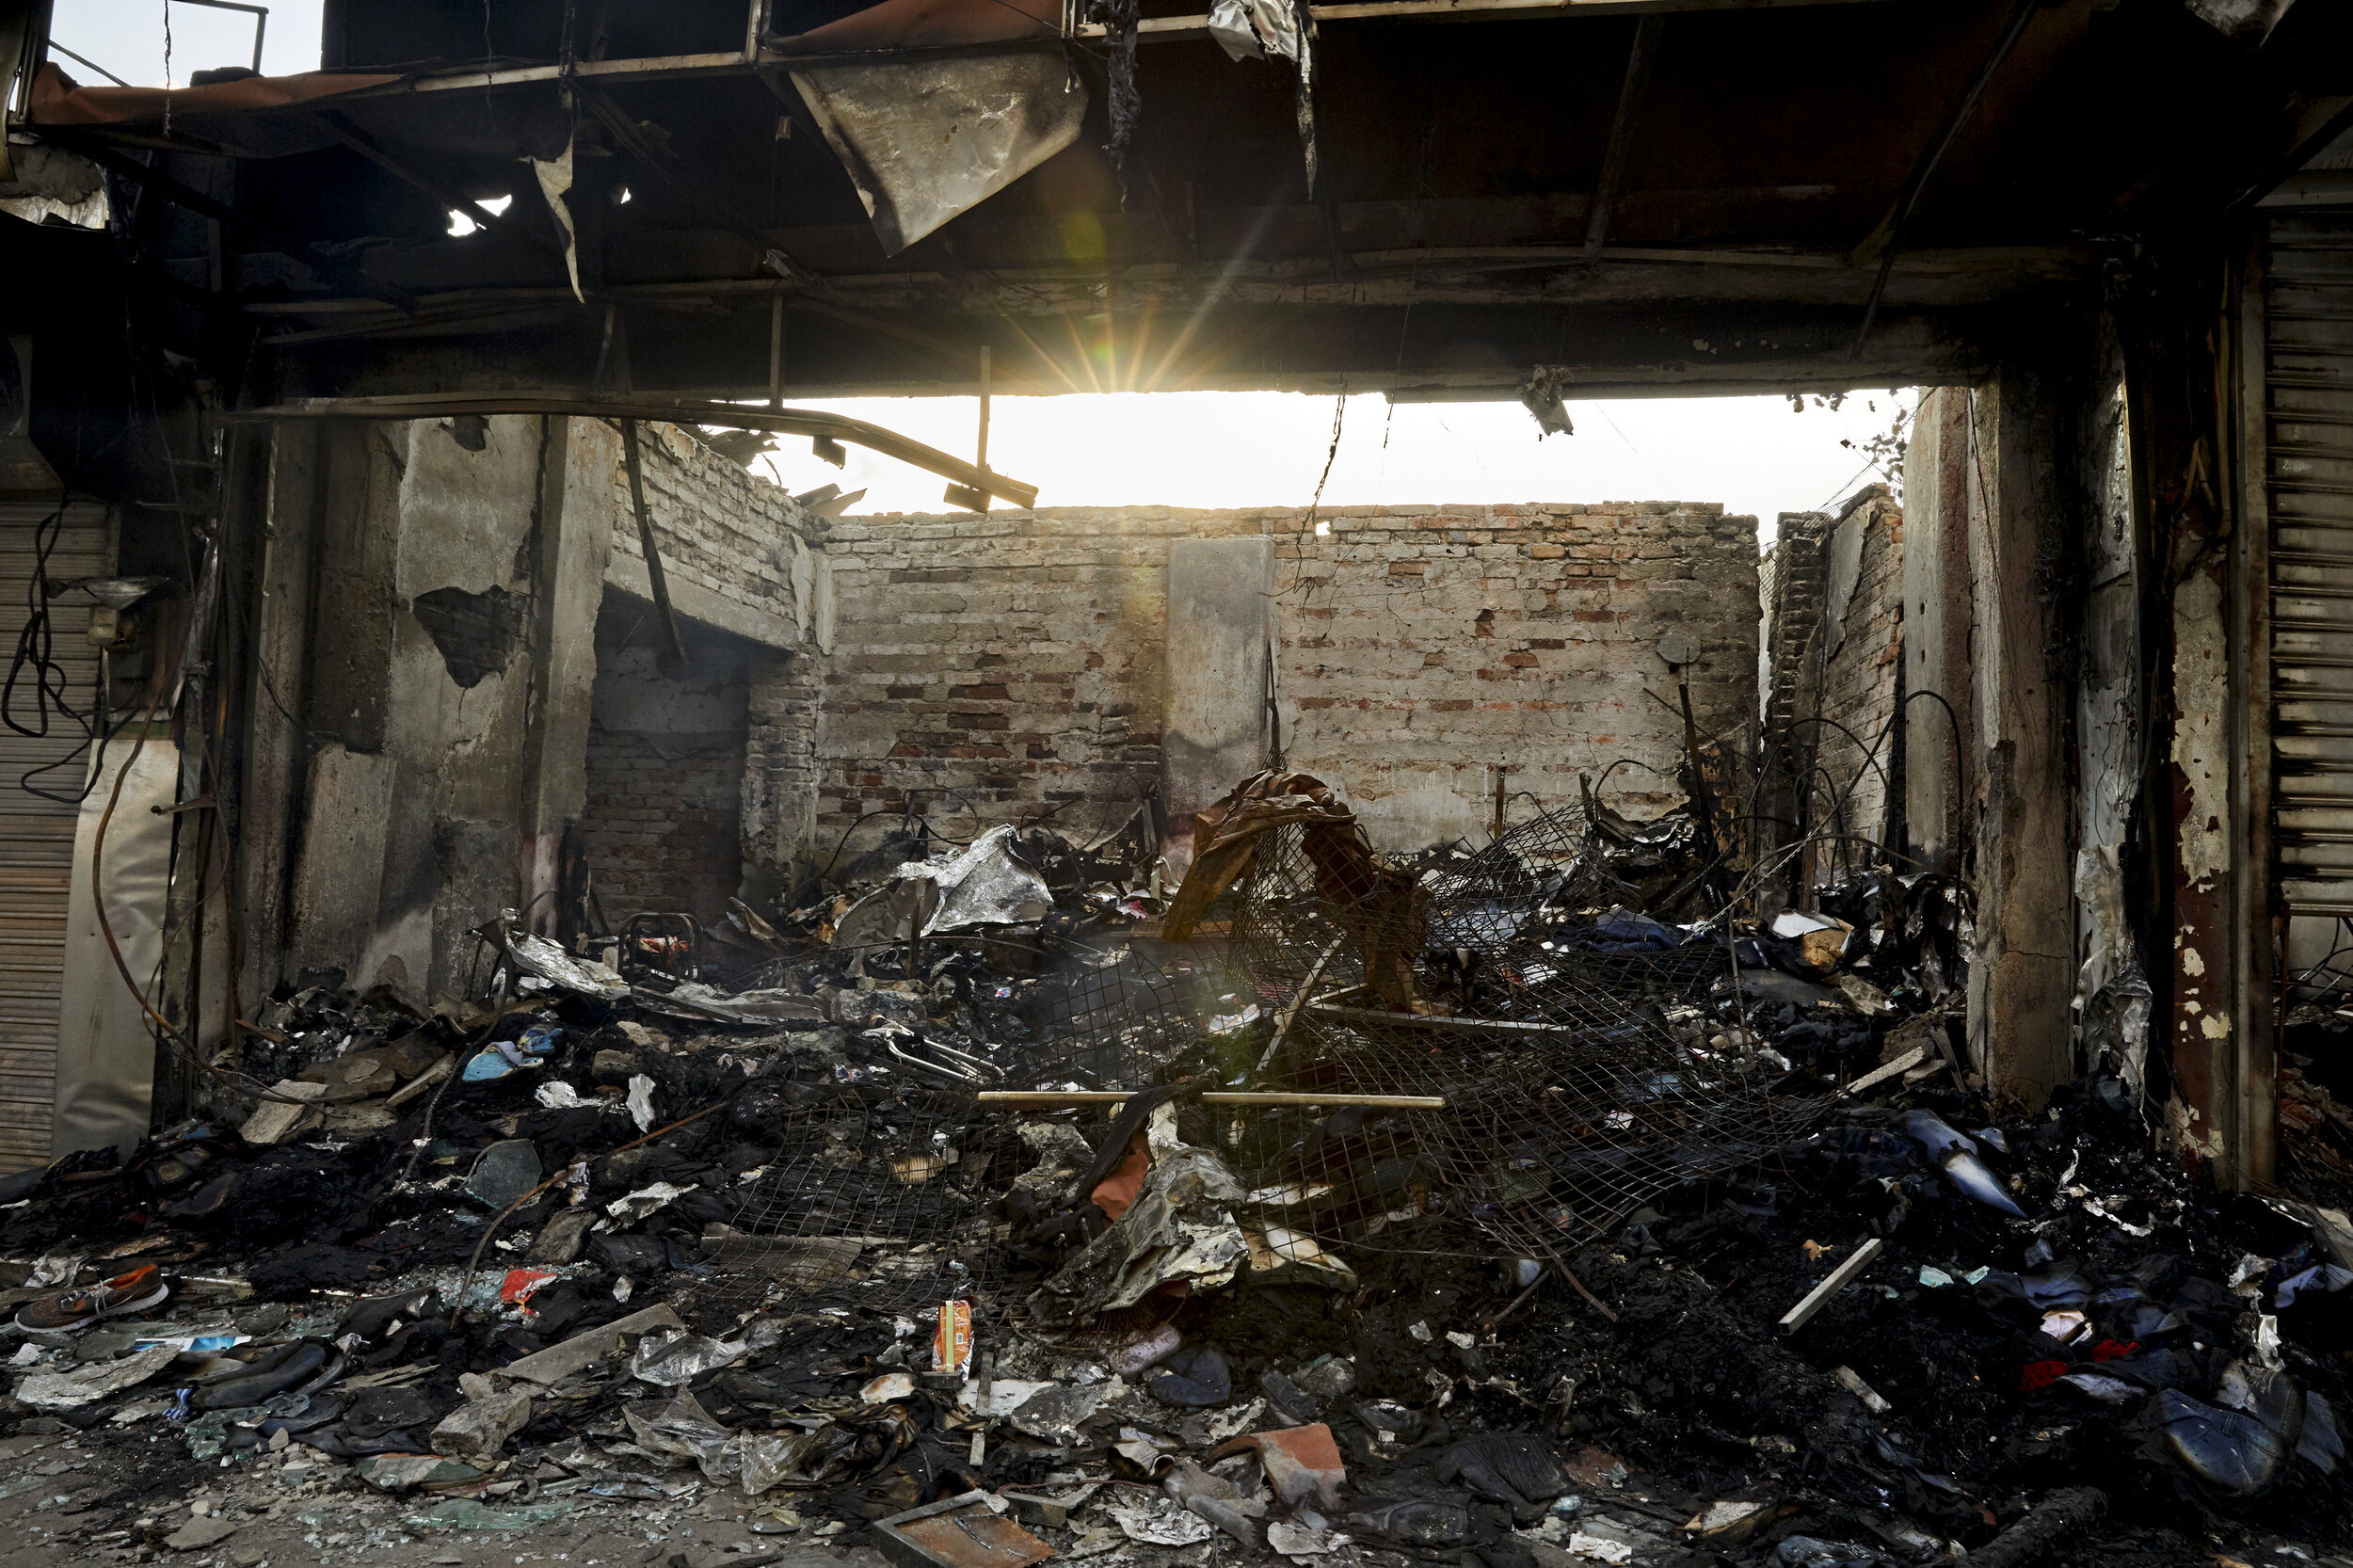  The remains of a clothing store that was set fire to. In retaliation for the bombings, people began looting mosques and burning down Muslim-run businesses, with a nationwide curfew enacted for weeks to try to stem the violence.  